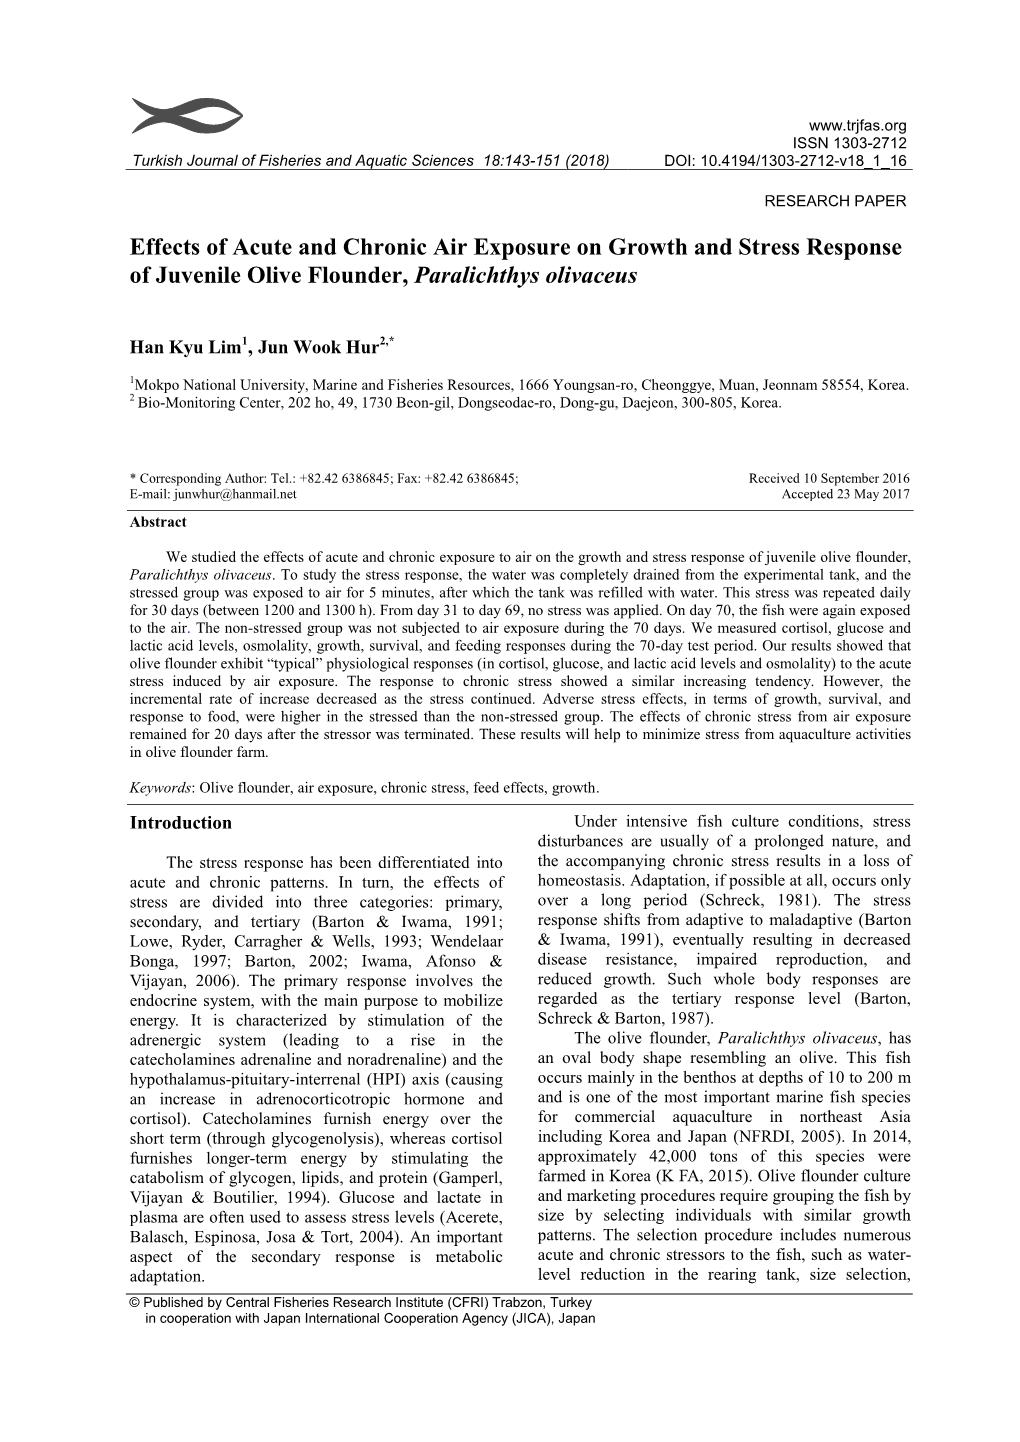 Effects of Acute and Chronic Air Exposure on Growth and Stress Response of Juvenile Olive Flounder, Paralichthys Olivaceus